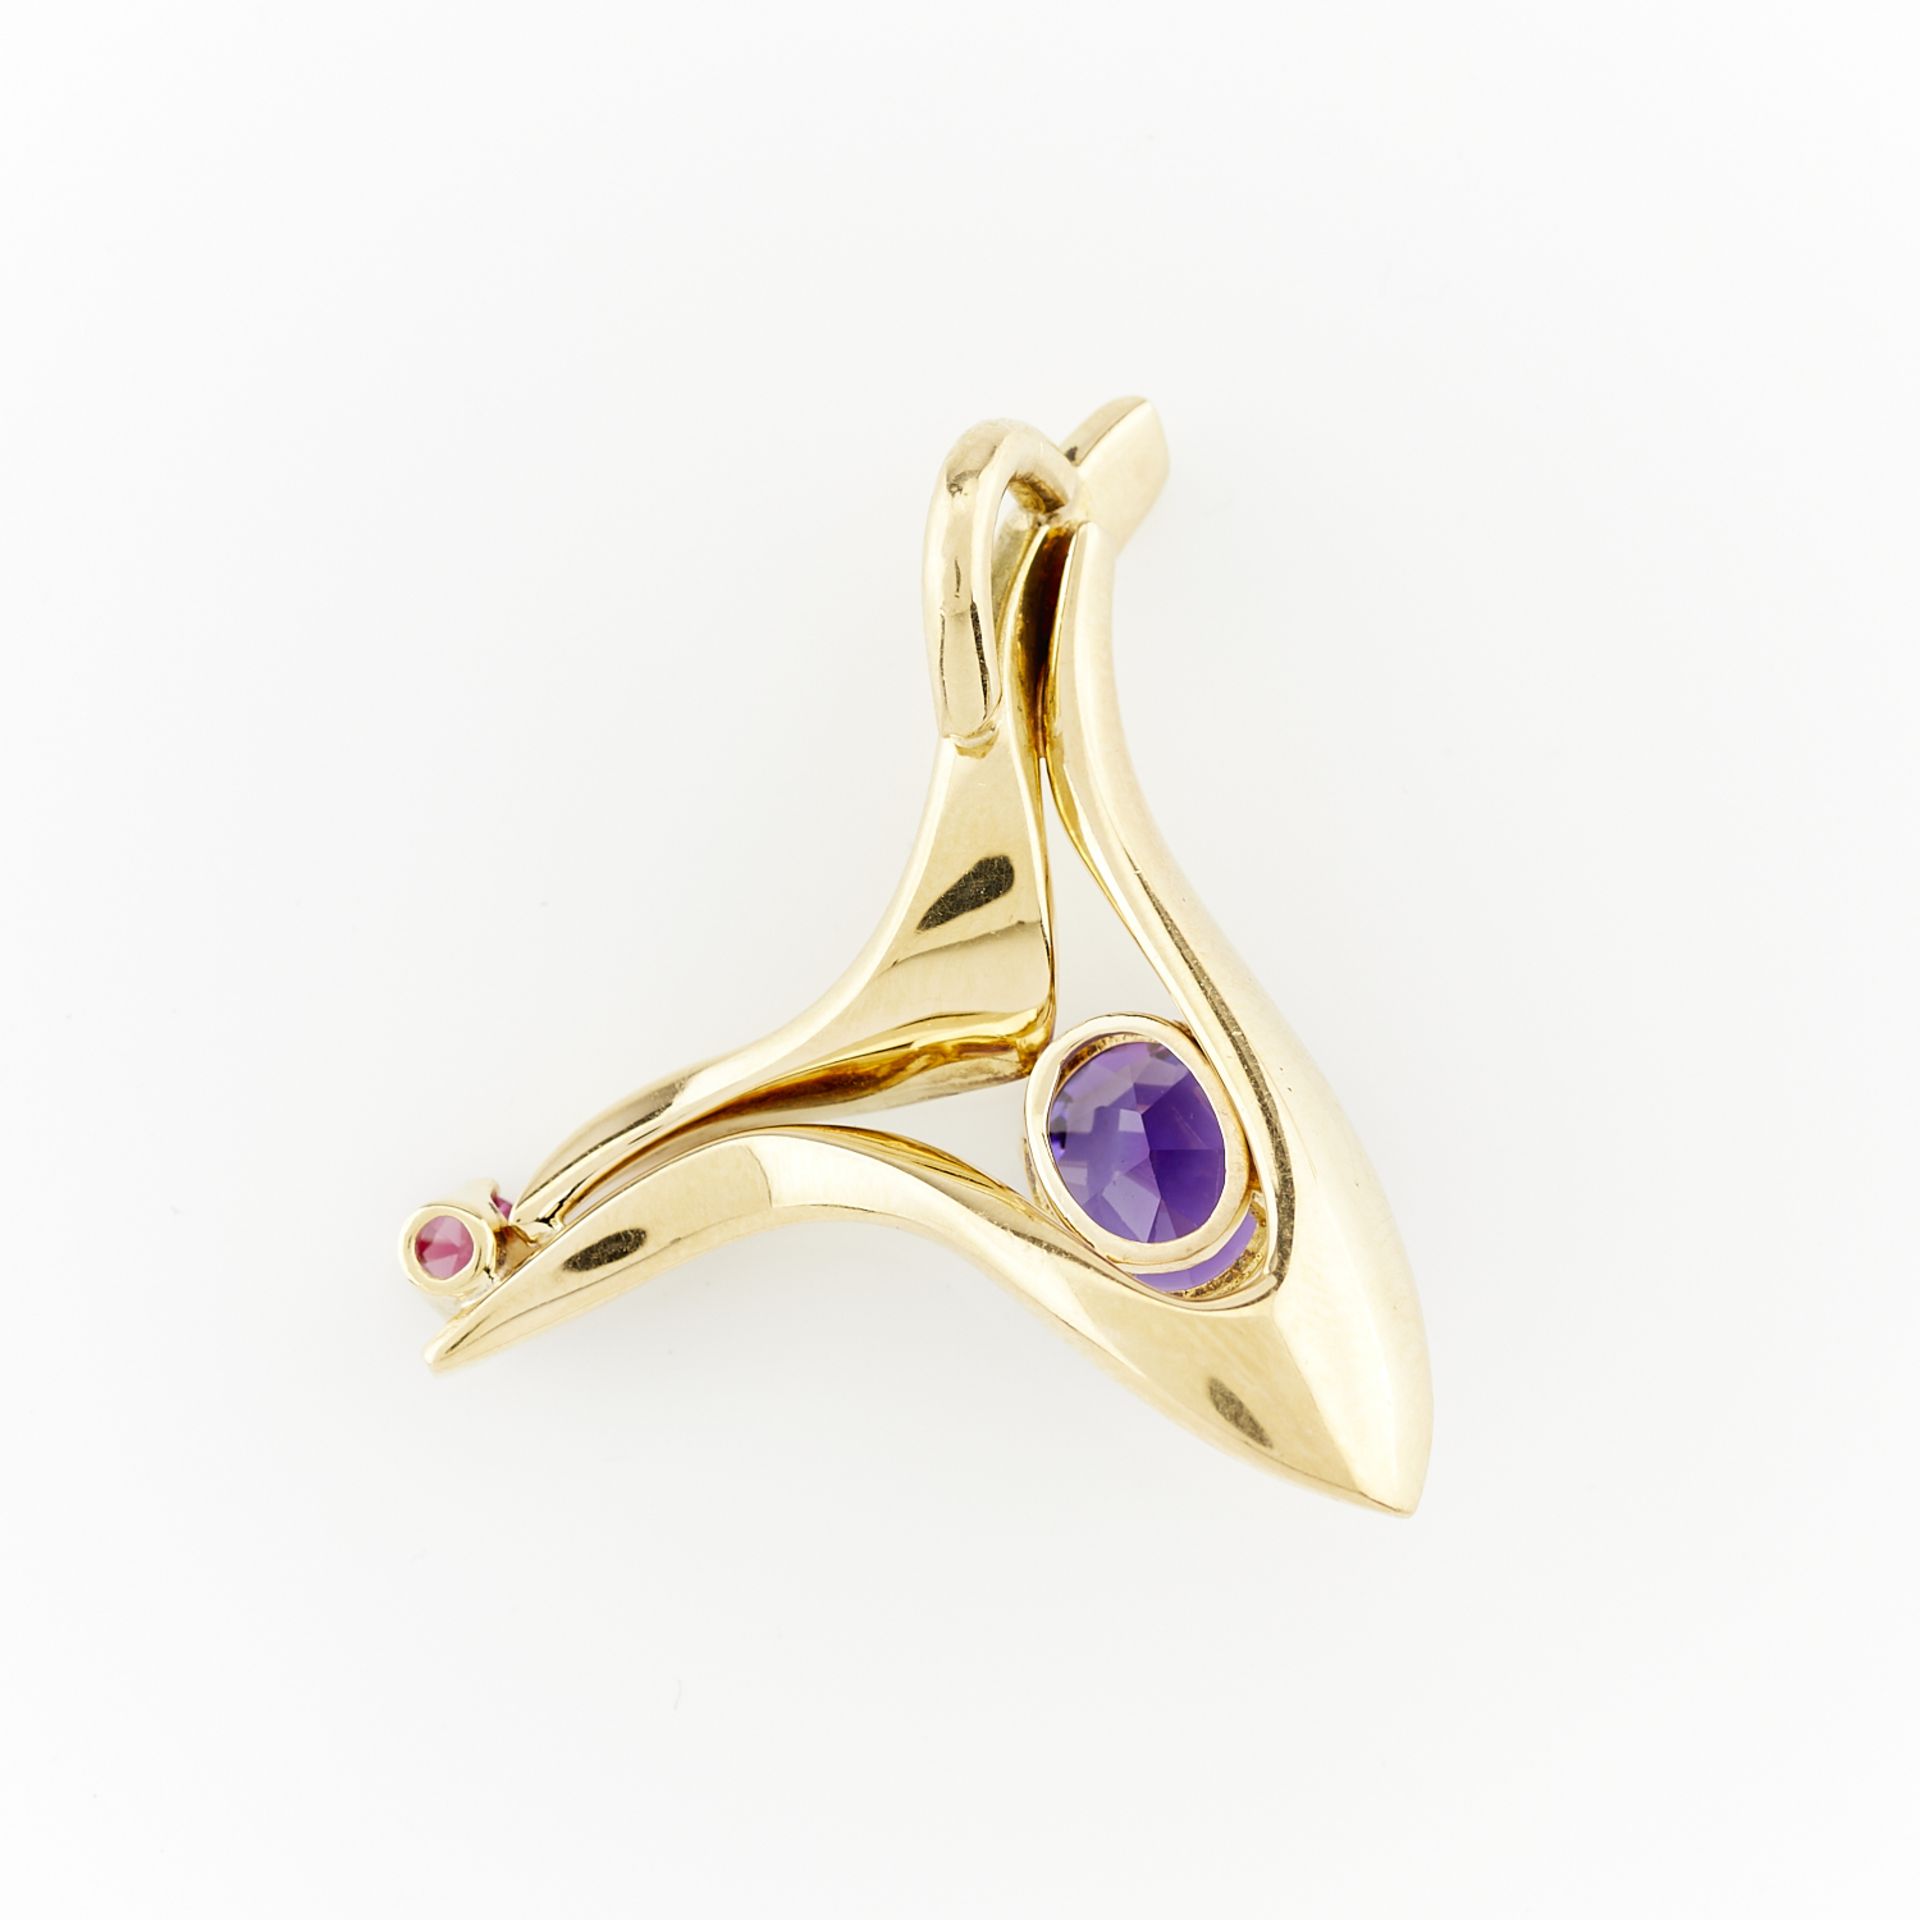 18k Gold Pendant with Amethyst & Citrine - Image 3 of 6